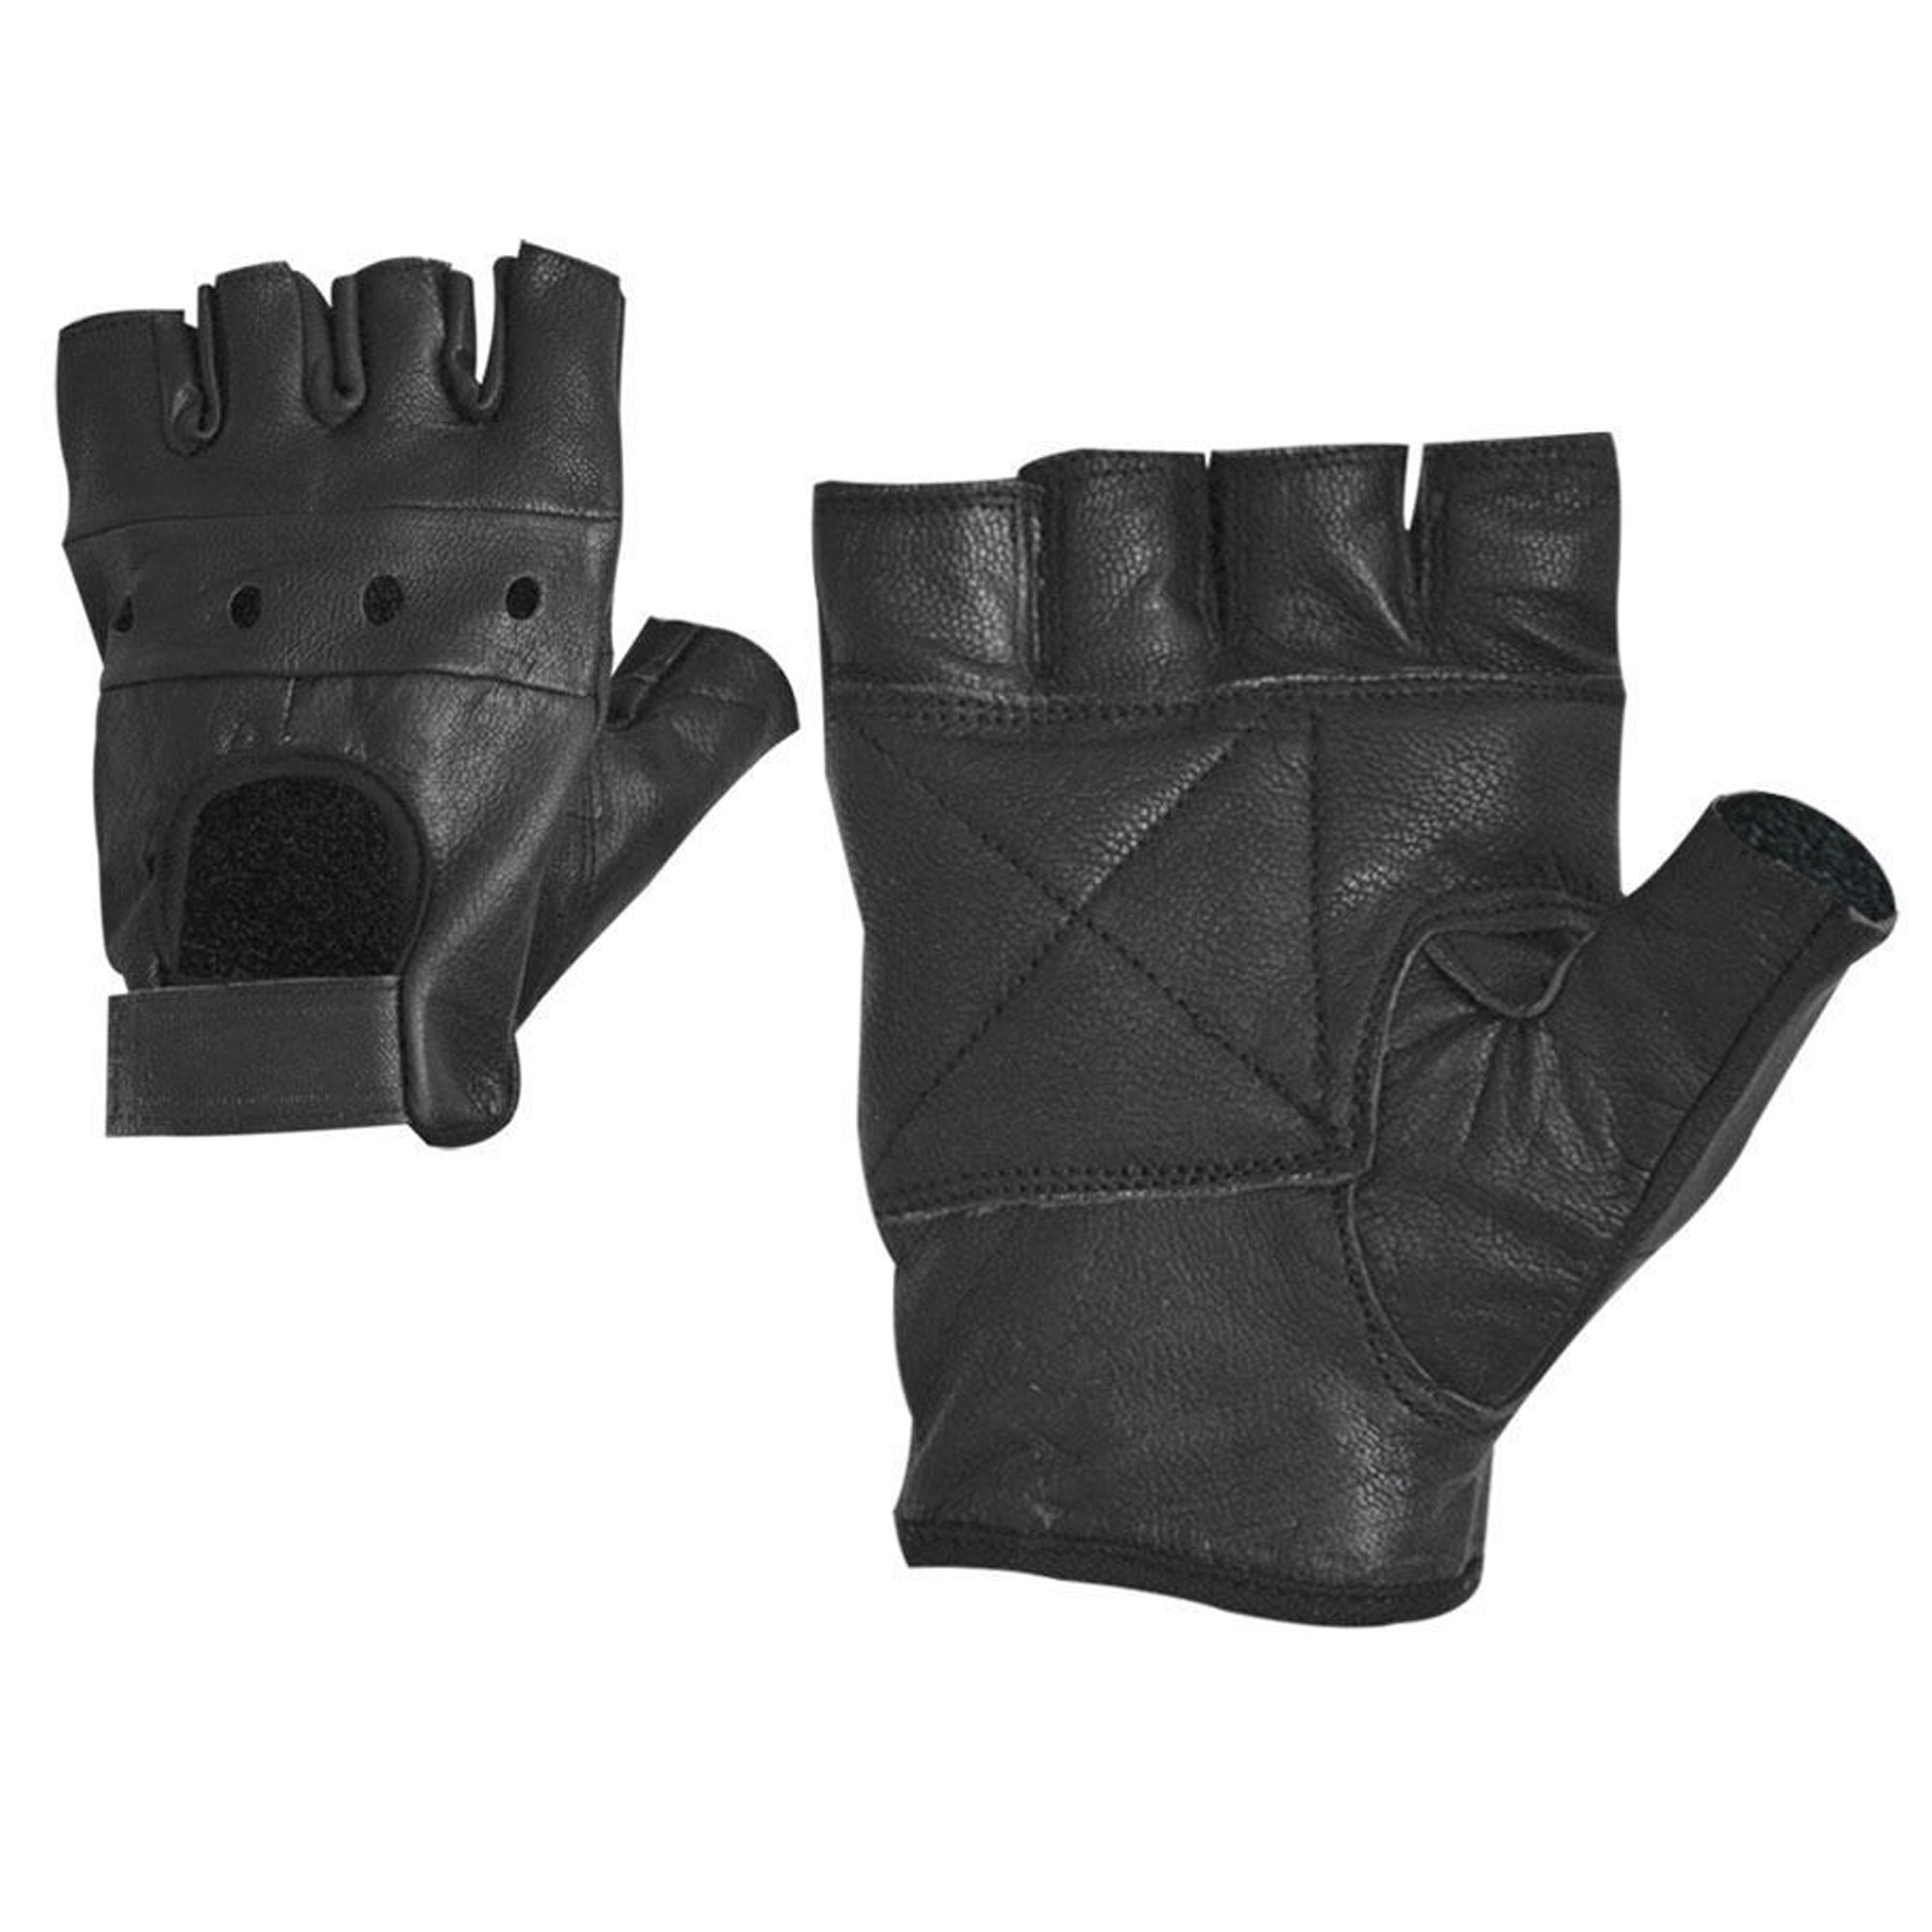 Black Mens Lightweight Heavy Duty Thick Leather Fingerless Riding Gloves 